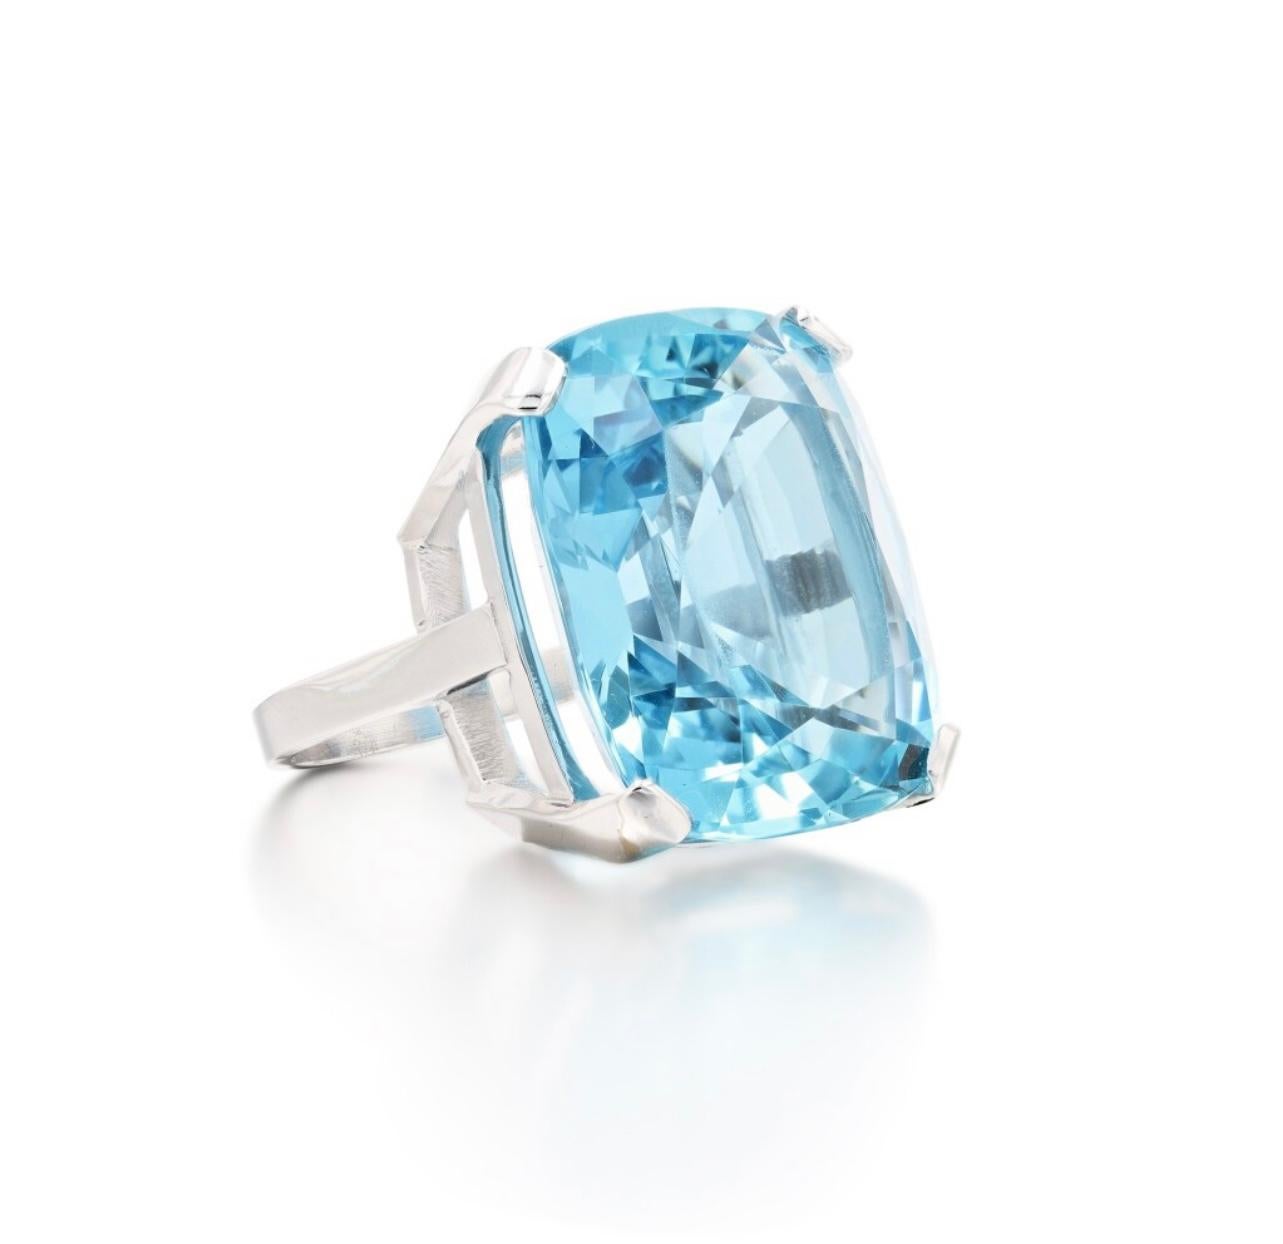 White gold ring set with an exceptional cushion-cut Santa-Maria aquamarine weighing 39.24 carats.

Aquamarine weight: 39.24 carats

With Carat Gem Lab certificate, specifying Natural Aquamarine, Santa-Maria colour.

No visible inclusions.

The